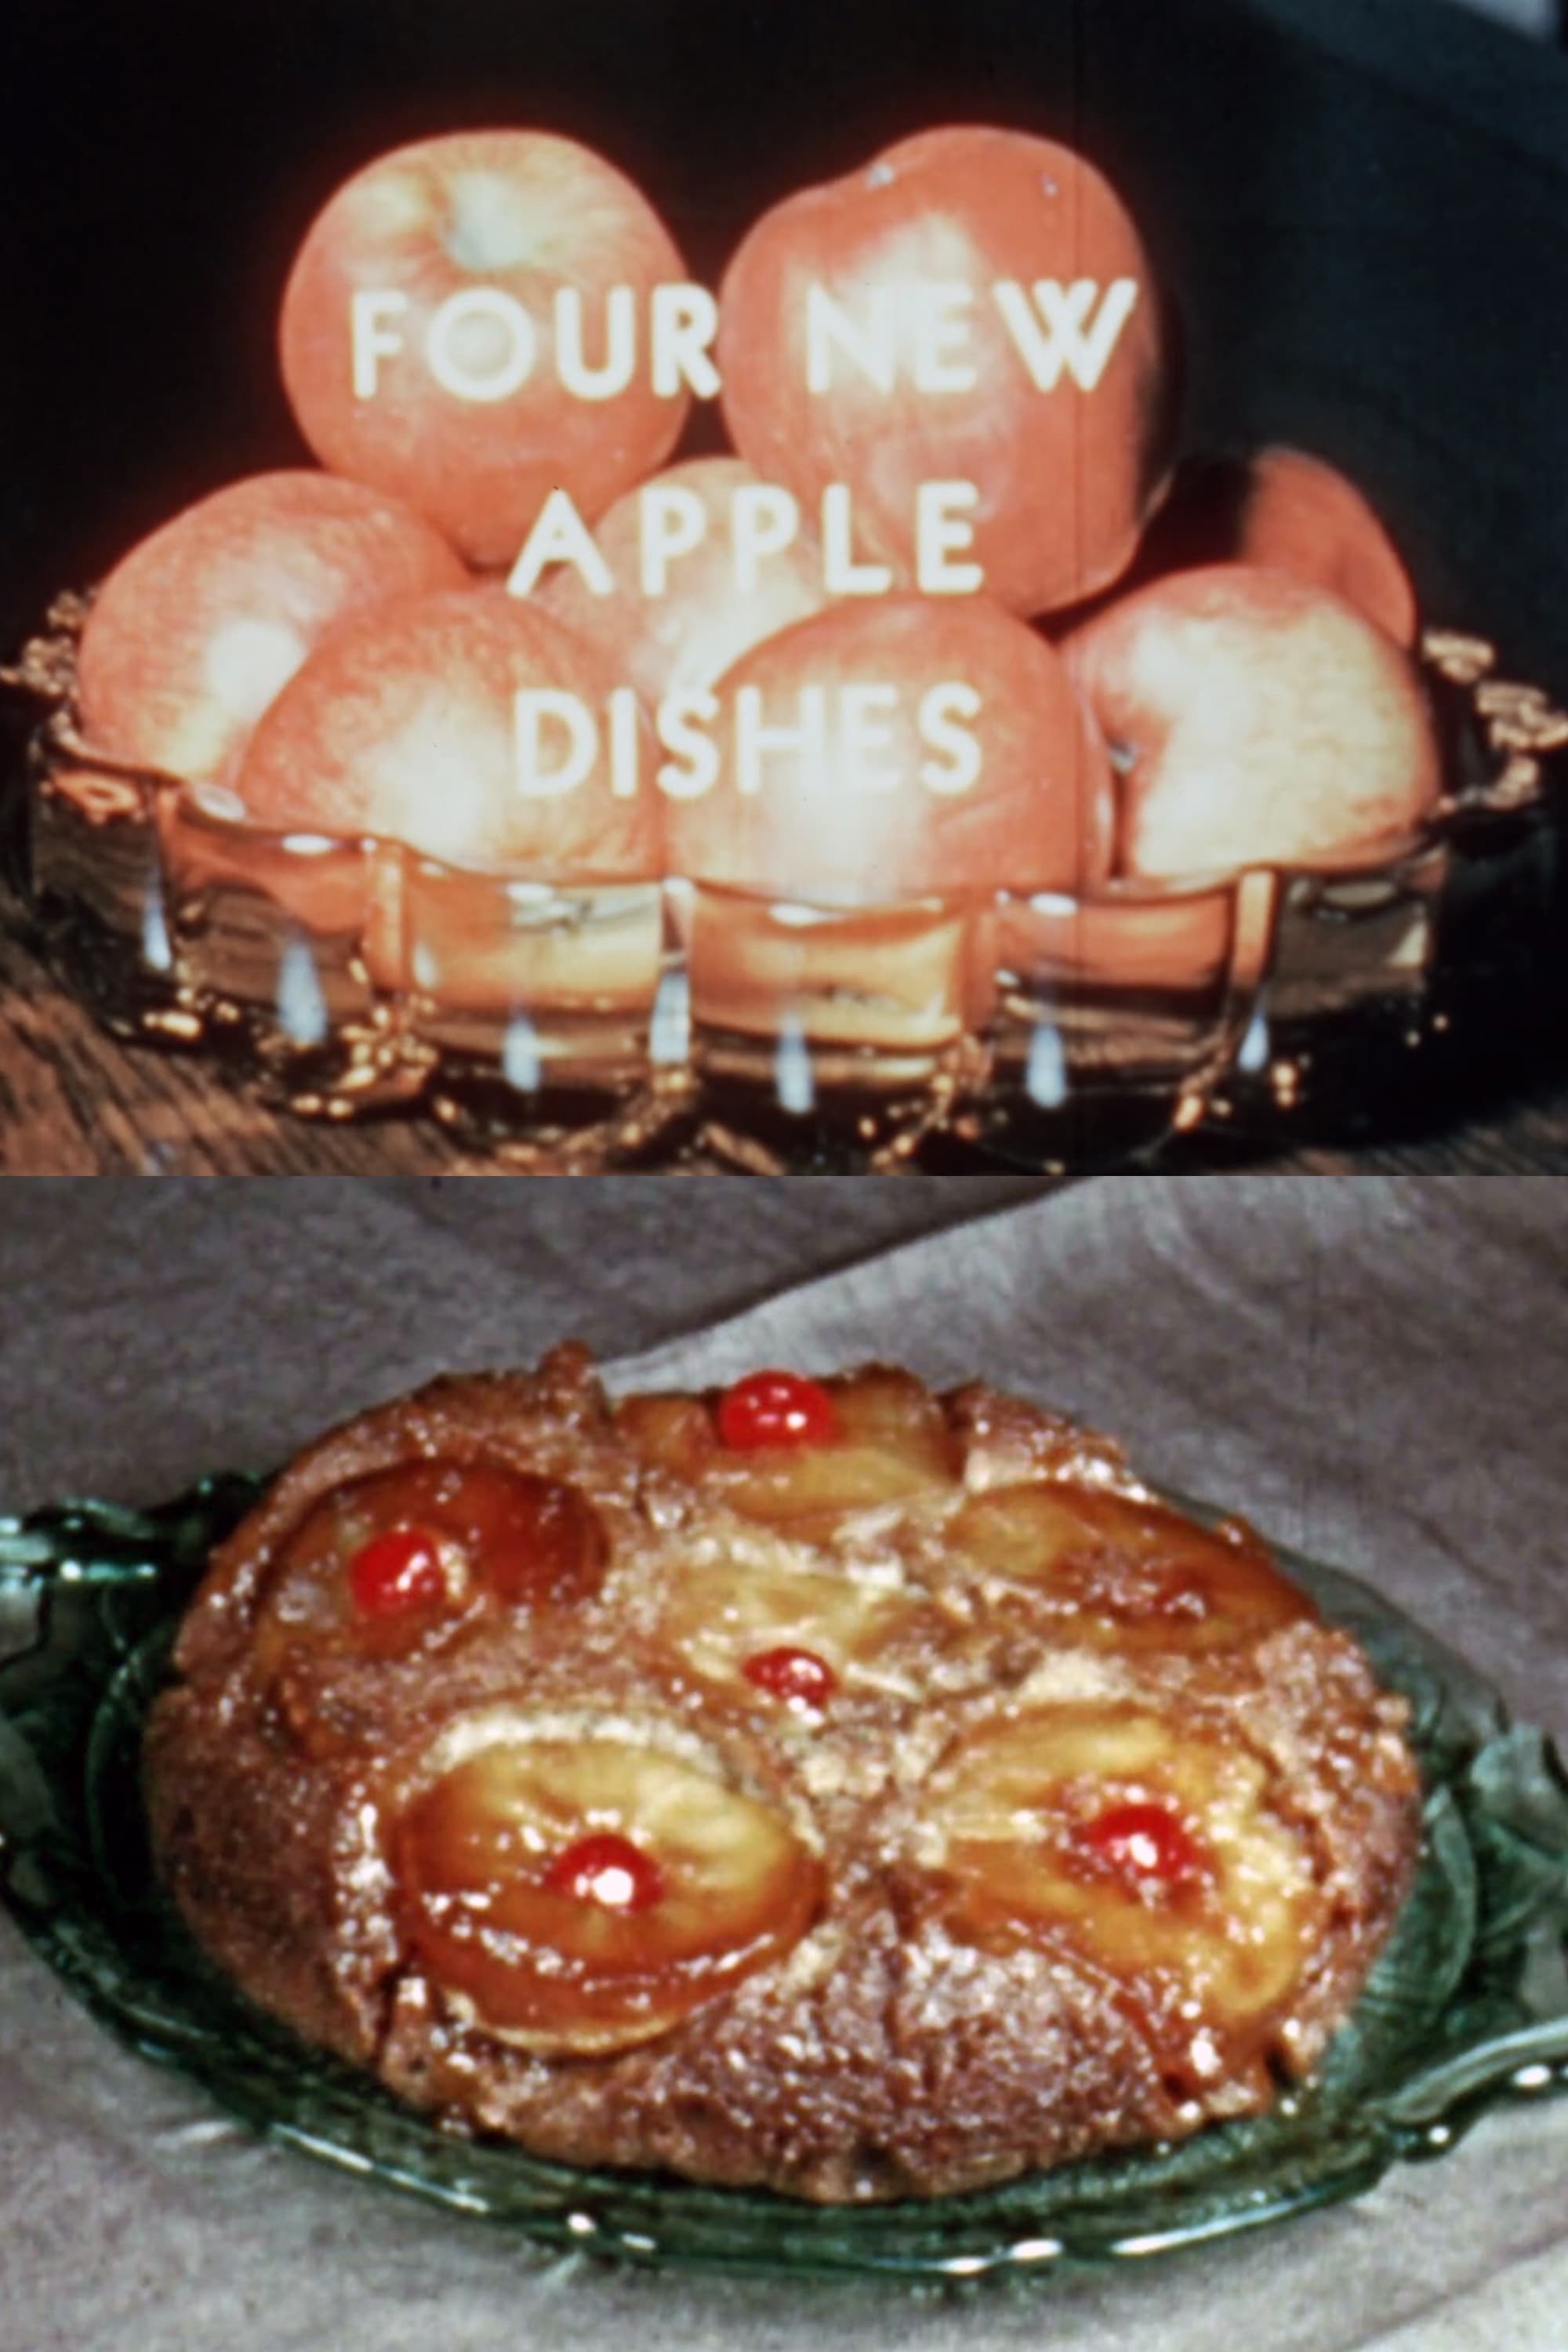 Four New Apple Dishes